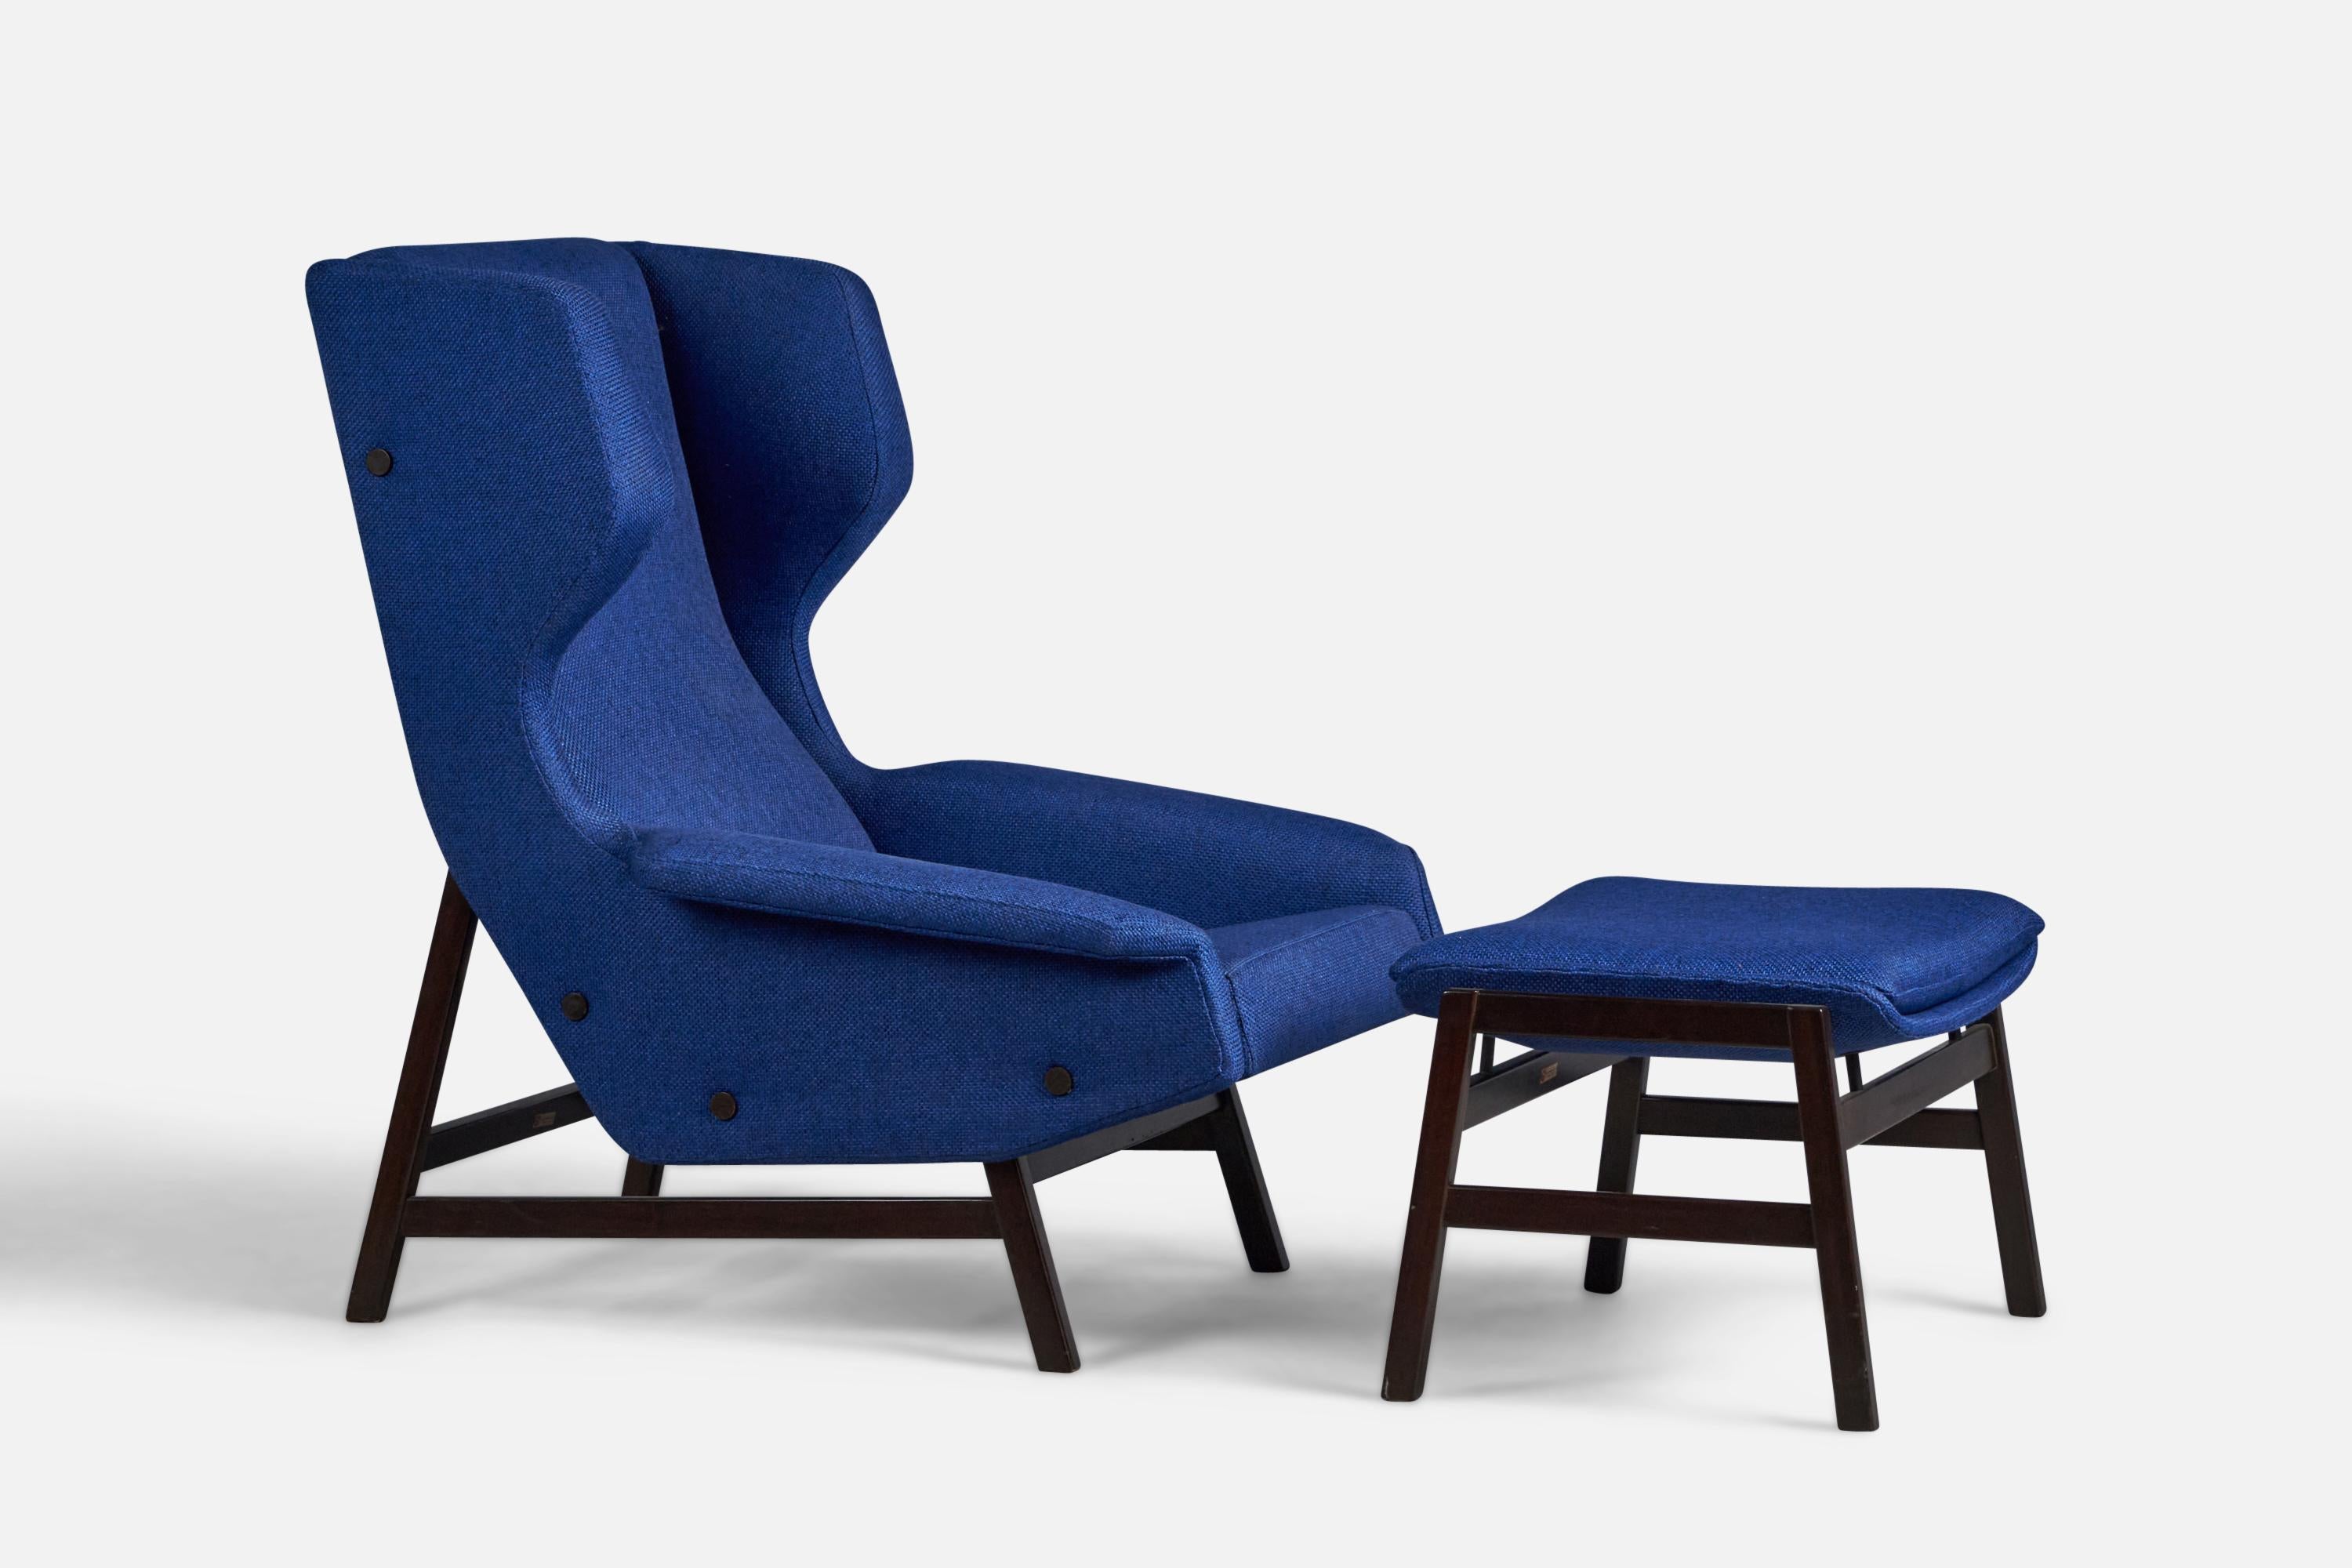 A blue fabric and dark-stained wood lounge chair designed by Gianfranco Frattini and produced by Cassina, Italy, 1950s.

Seat Height: 15.5” H

Leg Rest Dimensions (inches): 16.5” H x 23.5” W x 19” D